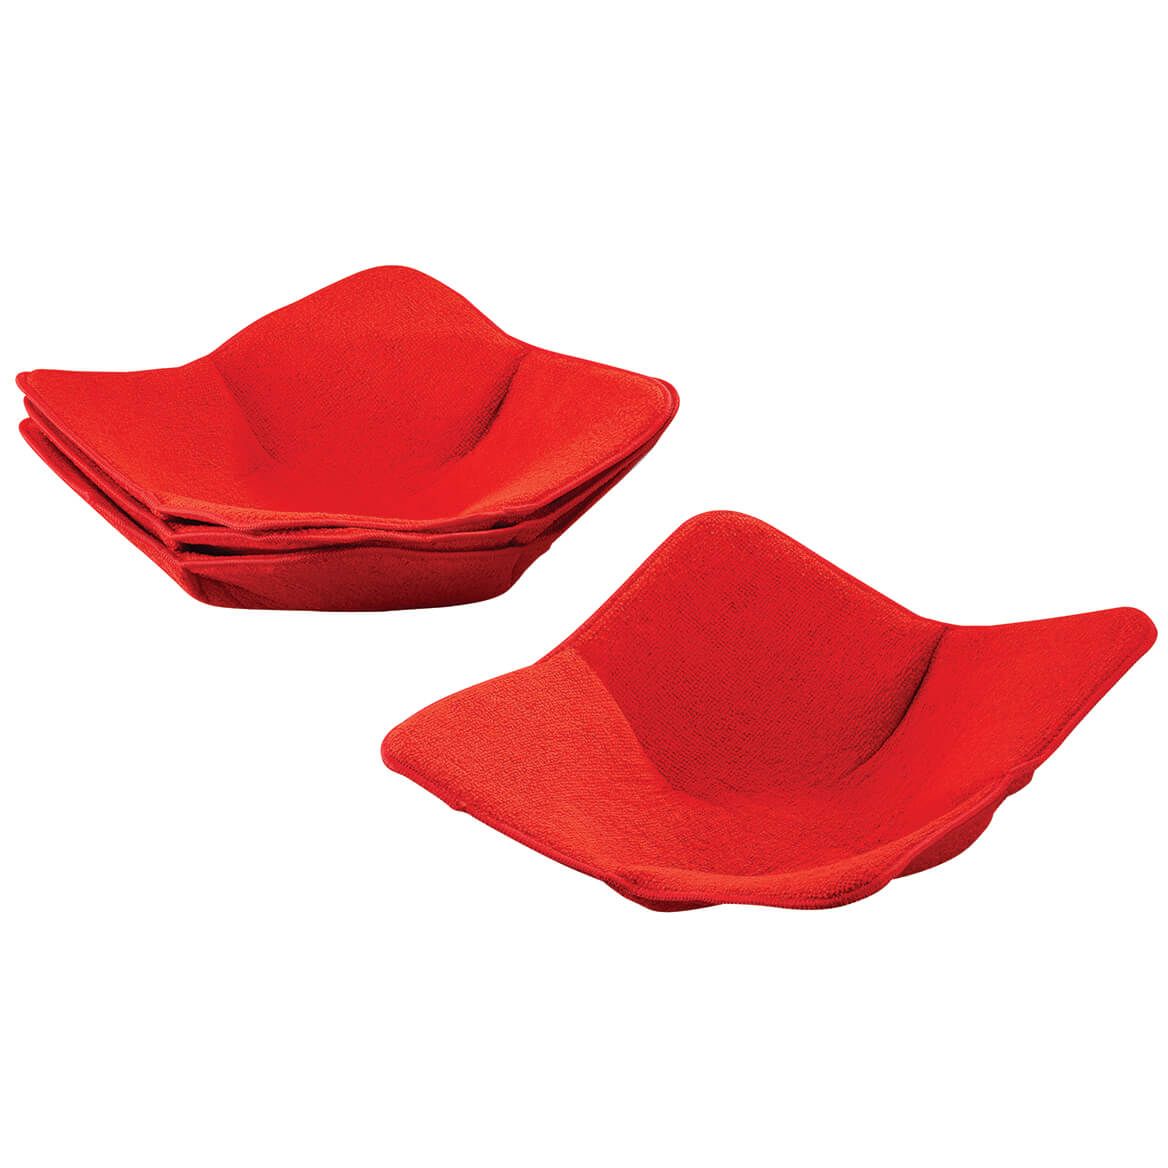 Plate Huggers, Set of 4 by Chef's Pride + '-' + 372364